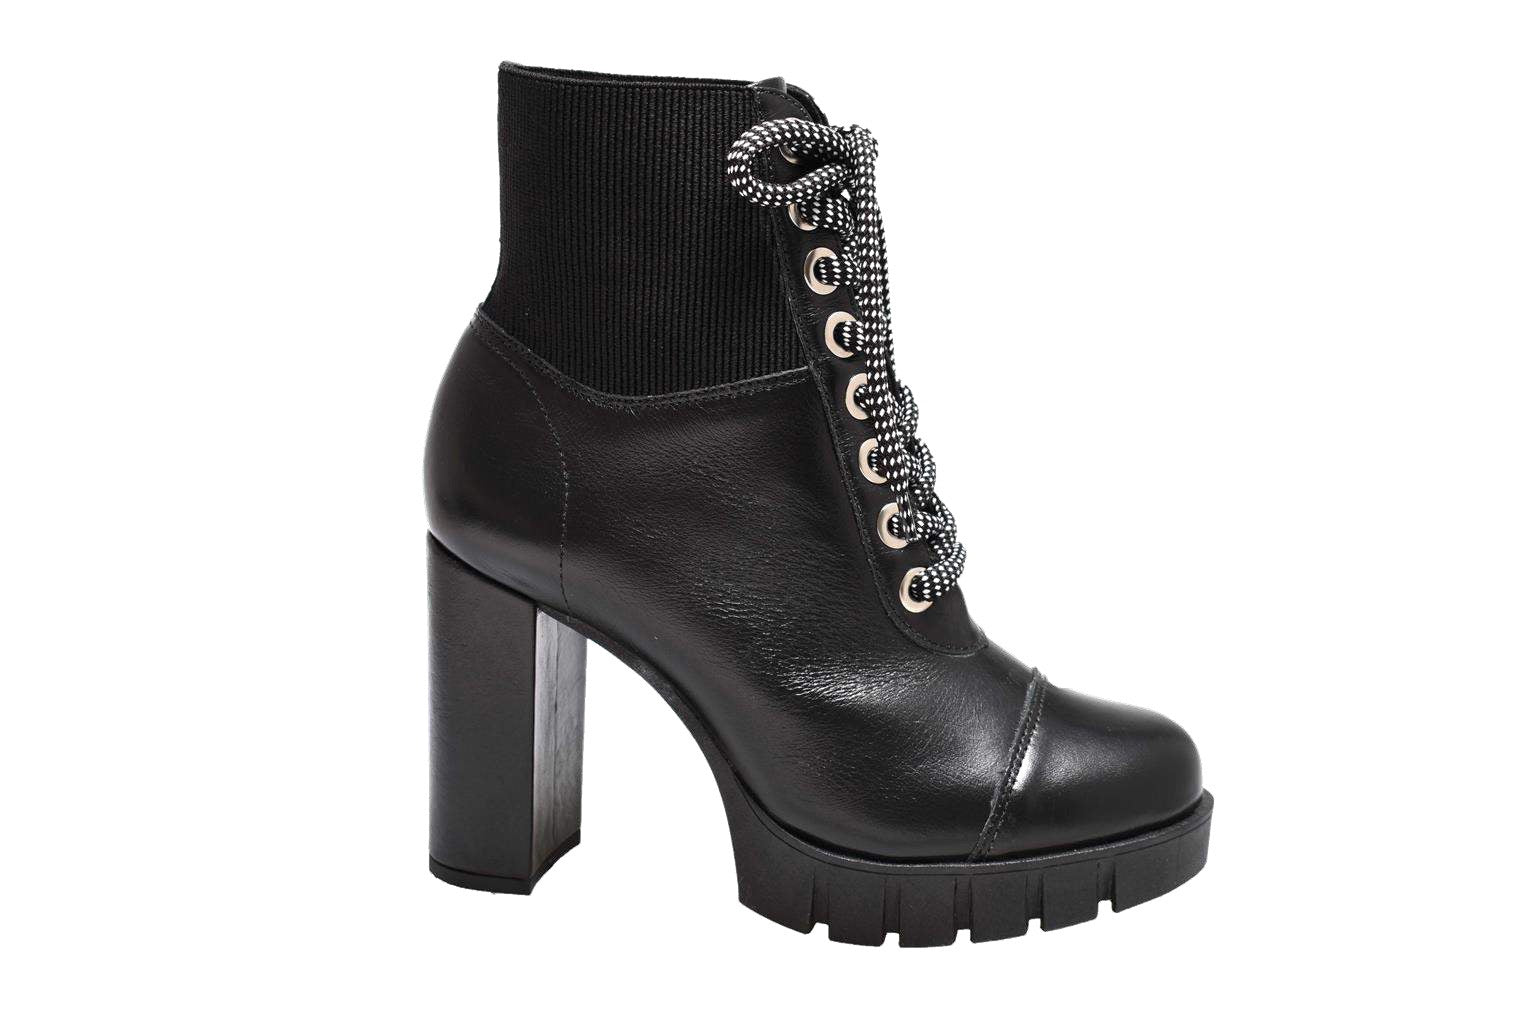 LACE UP BOOTS ON A TRACTOR SOLE LEATHER BLACK.